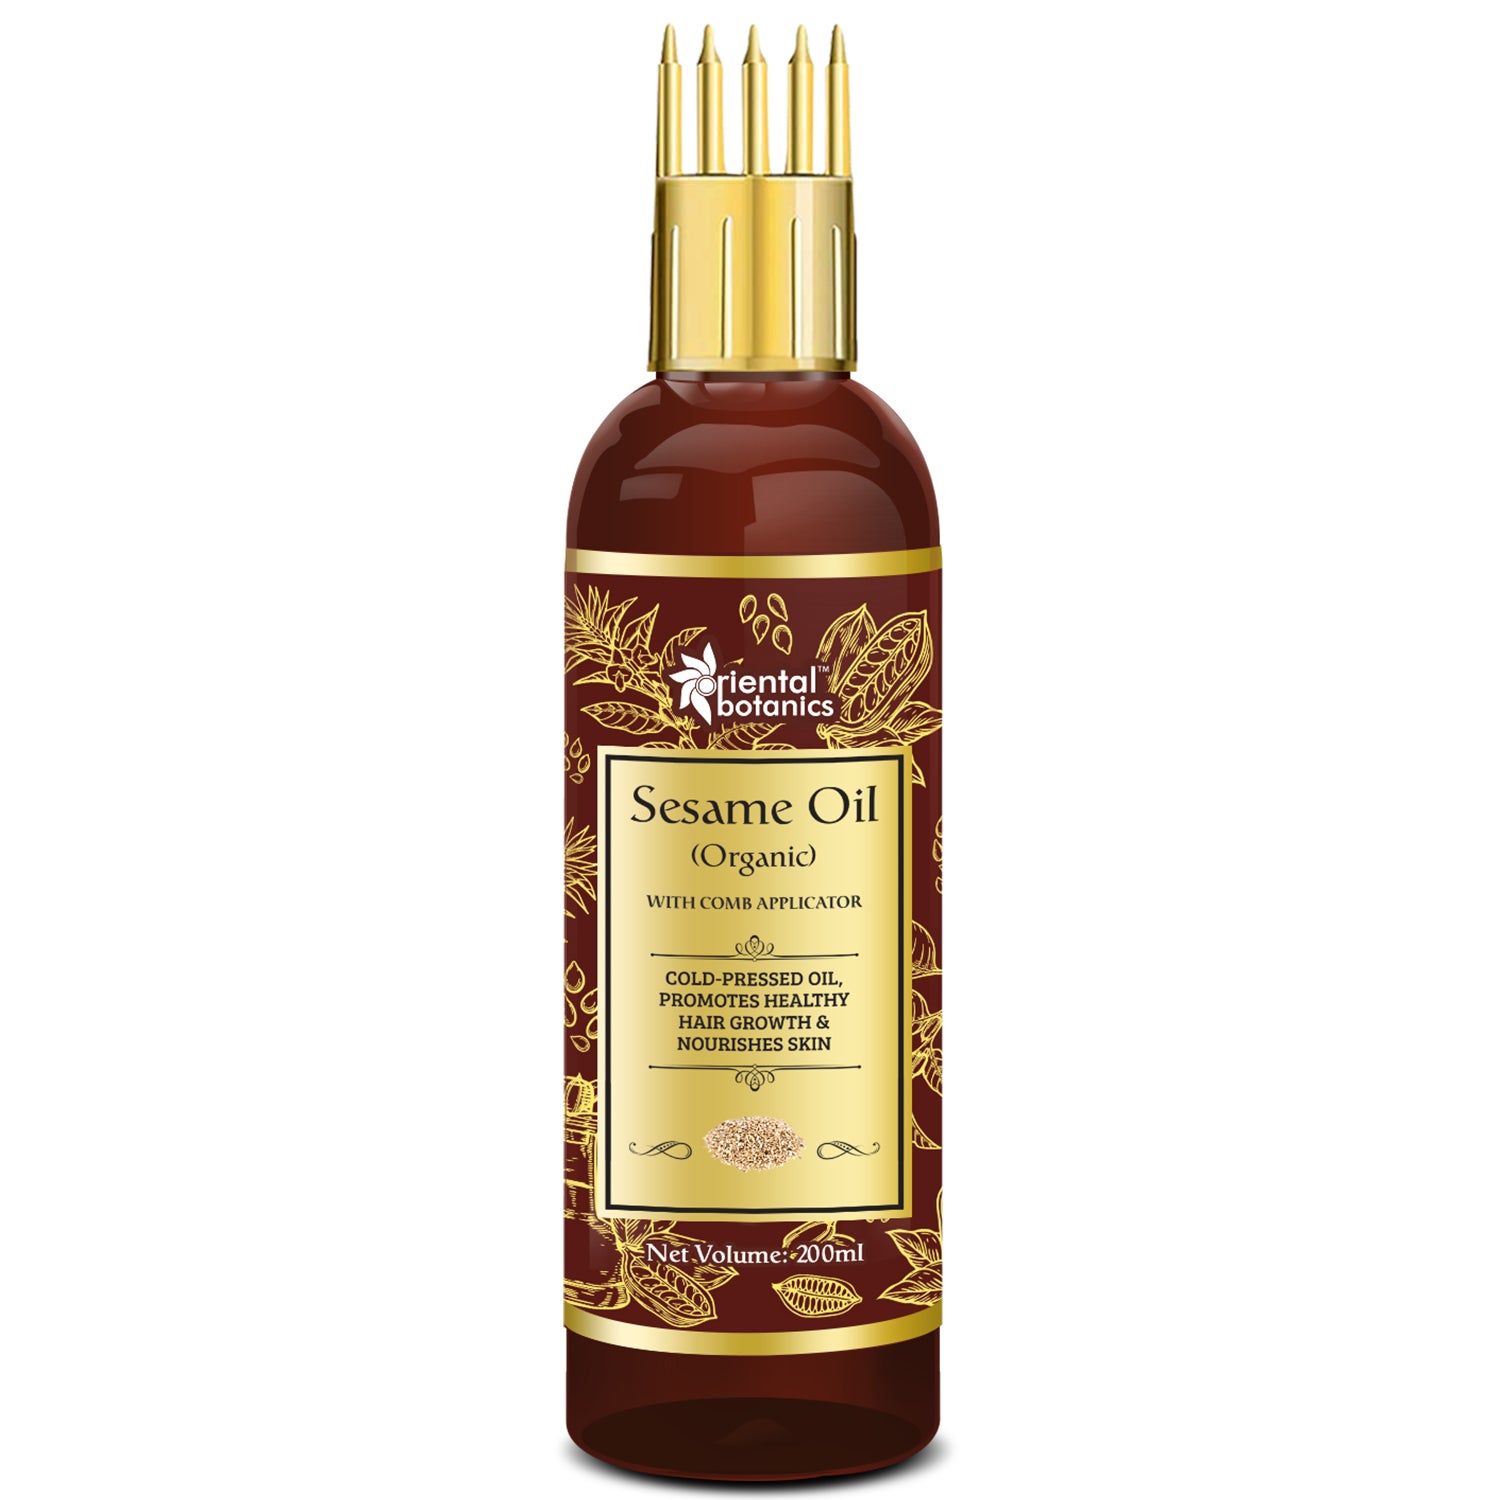 Oriental Botanics Sesame Oil for Hair and Skin Care - With Comb Applicator - Pure Oil with No Mineral Oil, Silicones, 200 ml